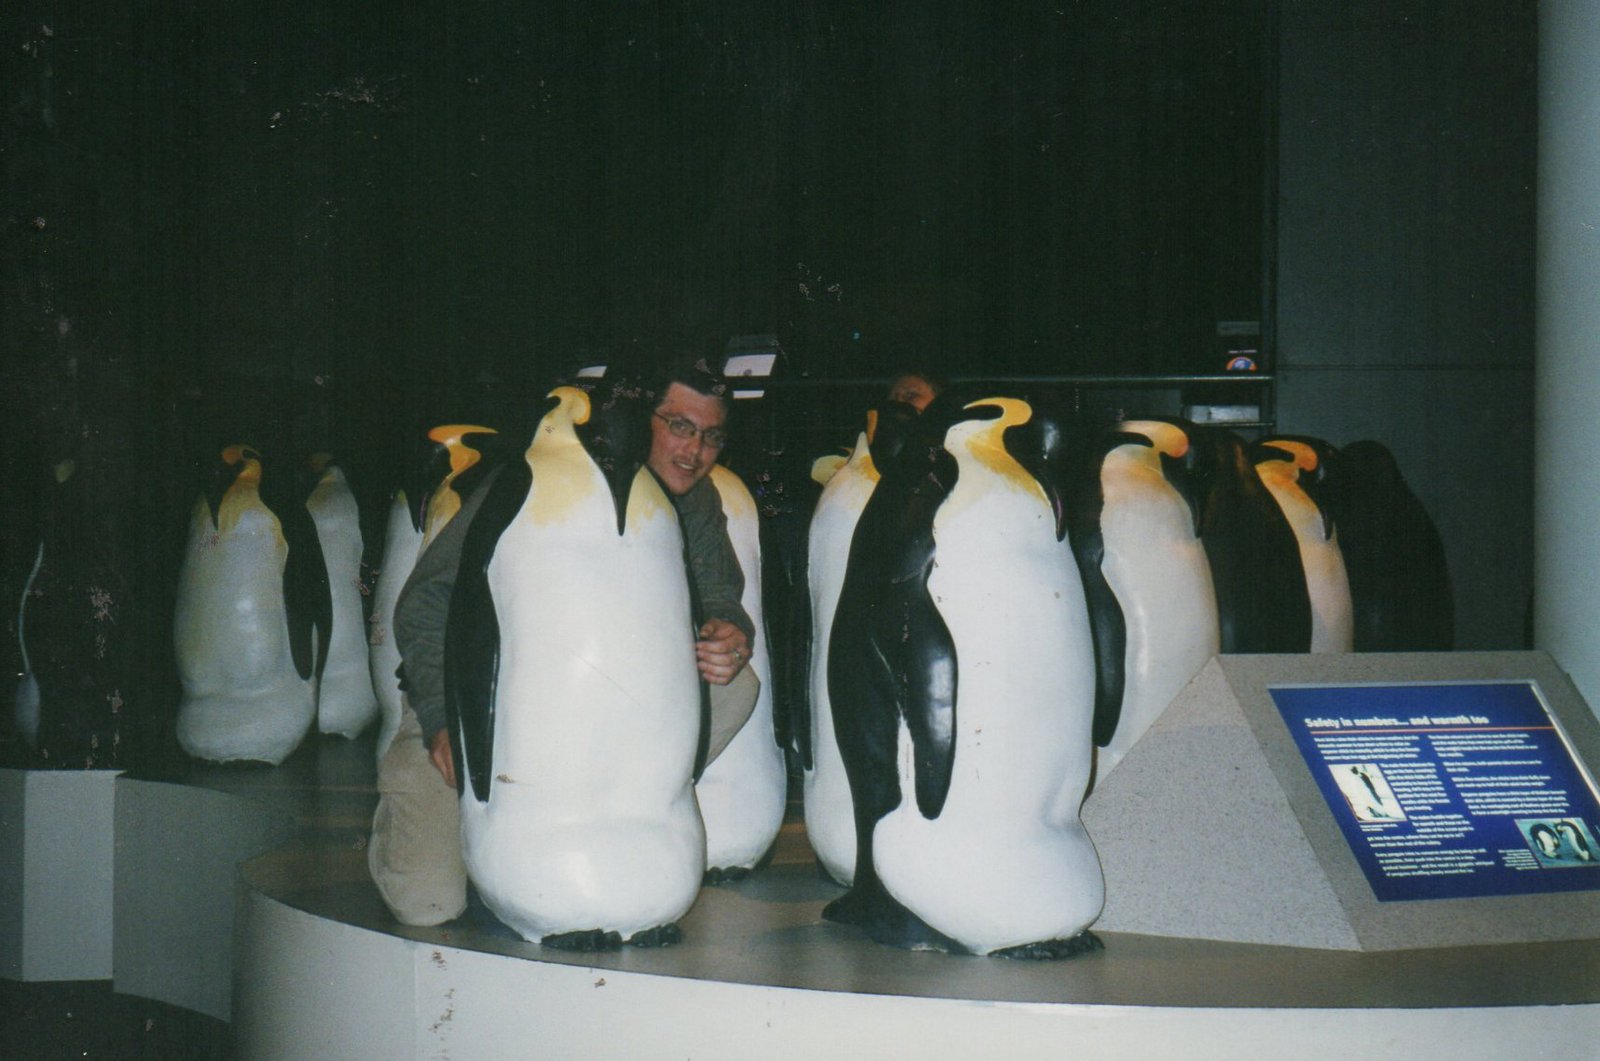 26 Christopher Wright in the penguins at antarctica.jpg